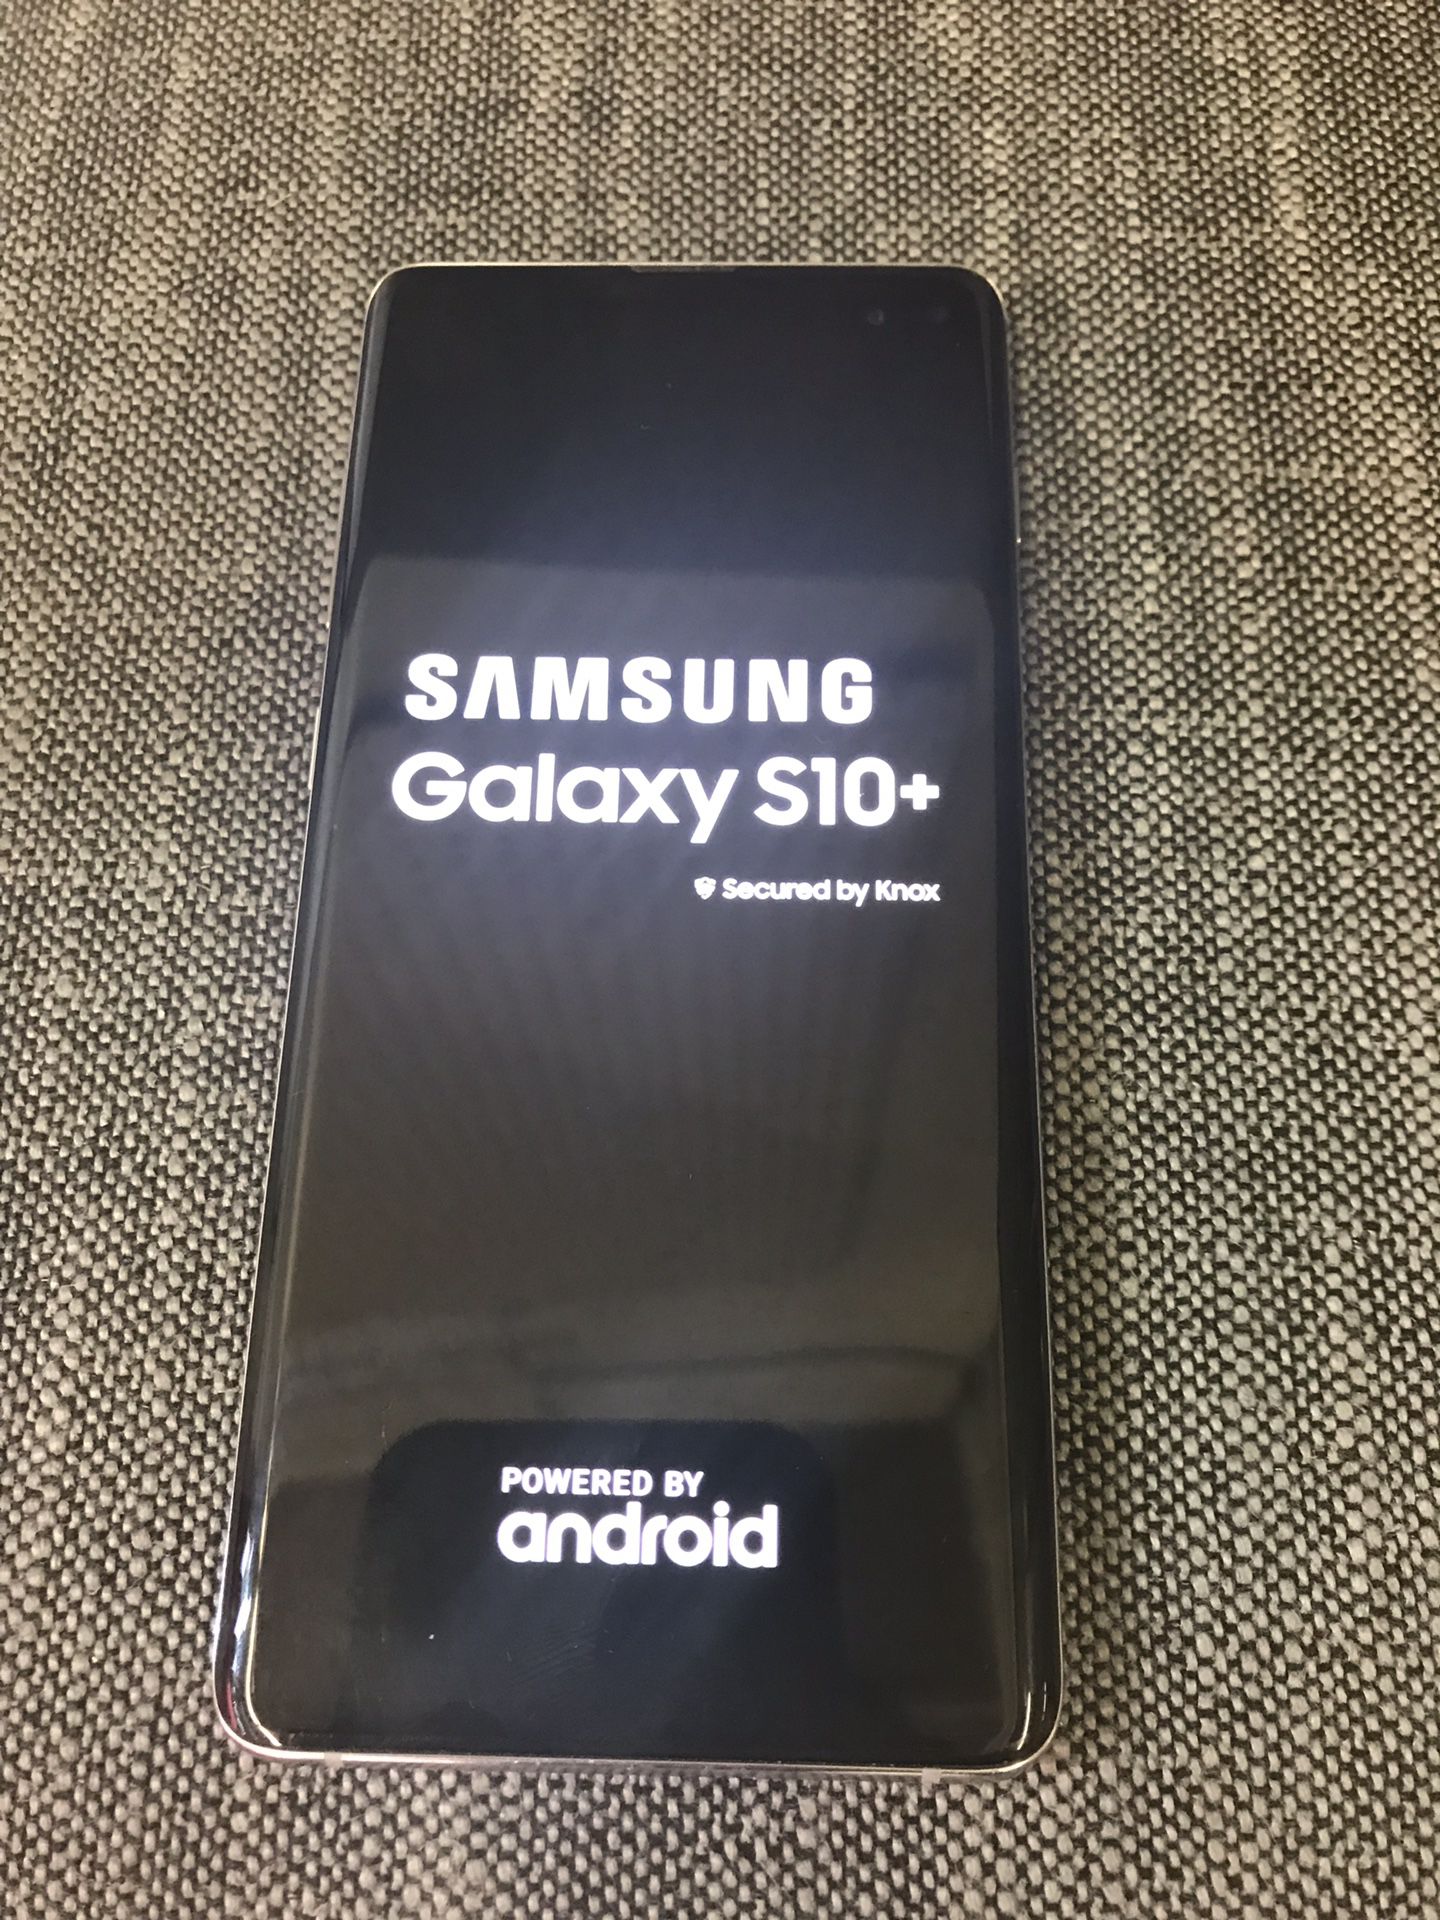 EXCELLENT CONDITION Samsung Galaxy S10+ PLUS 128GB (T-Mobile) UNLOCKED +USB CABLE +CHARGER $550 FIRM